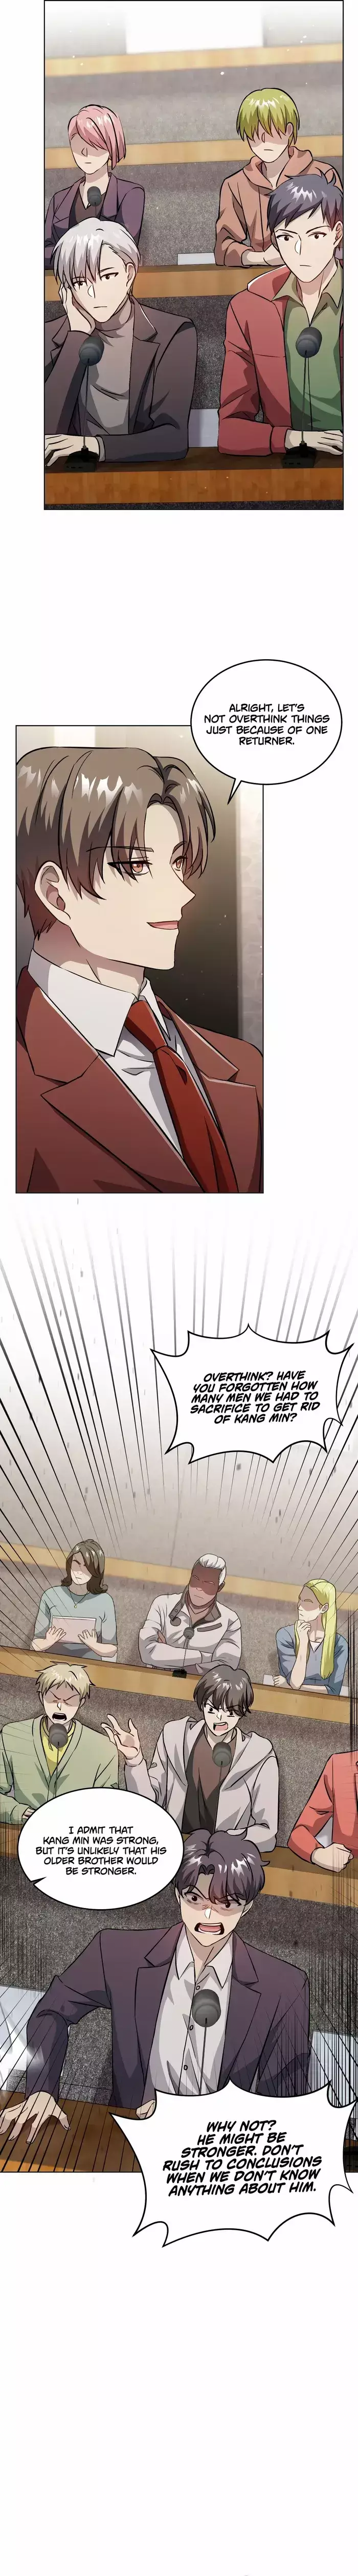 The Iron-Blooded Necromancer Has Returned - 9 page 24-90c057b4